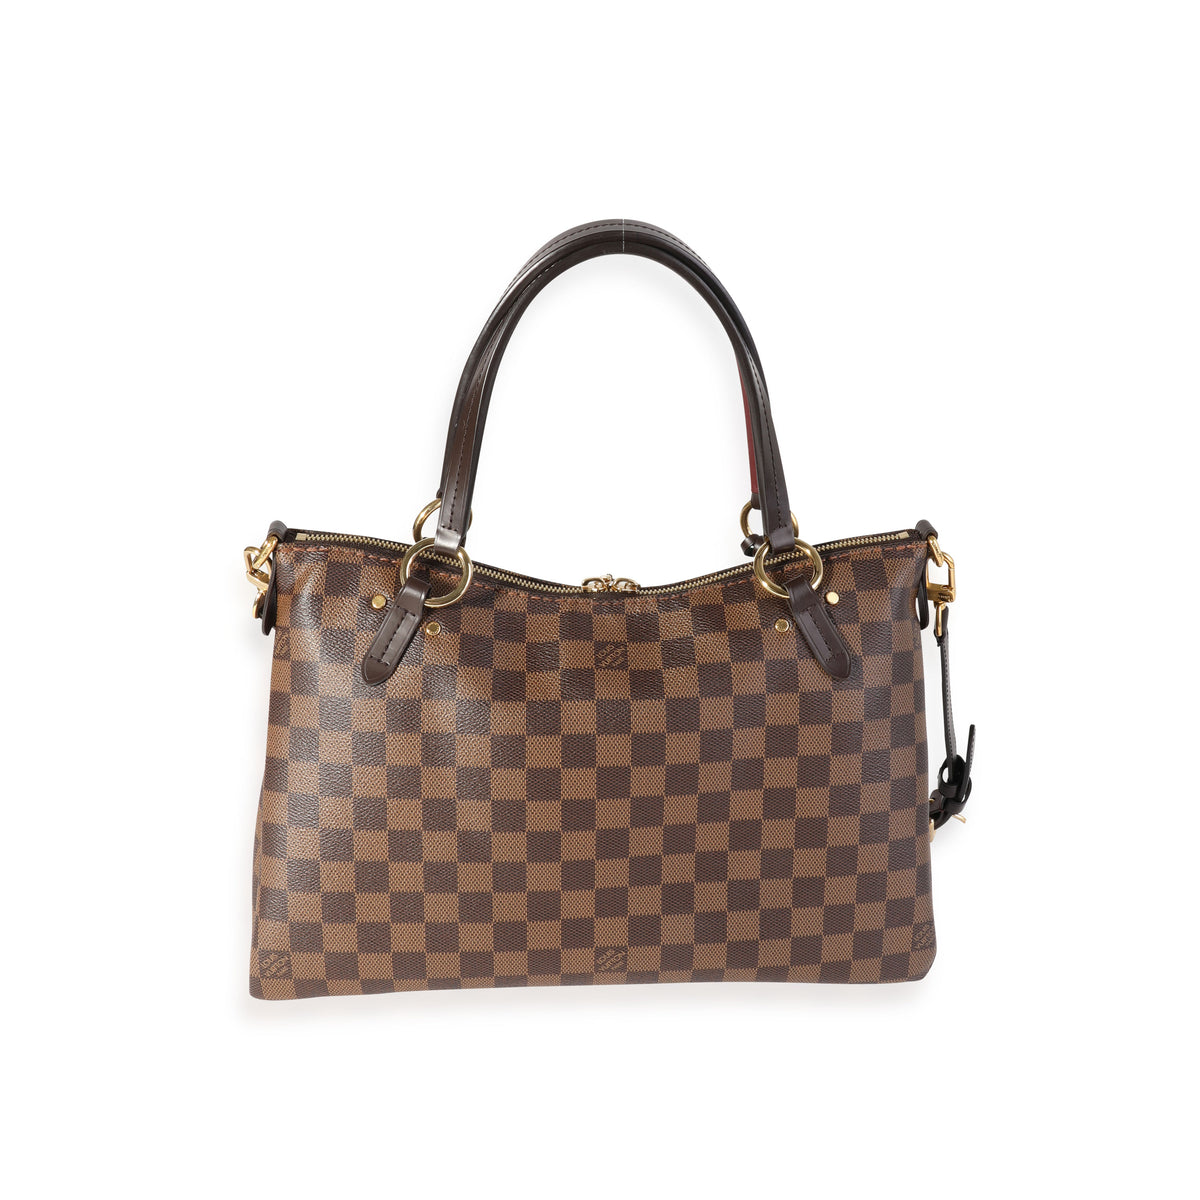 Louis Vuitton - Authenticated Lymington Handbag - Leather Brown for Women, Very Good Condition